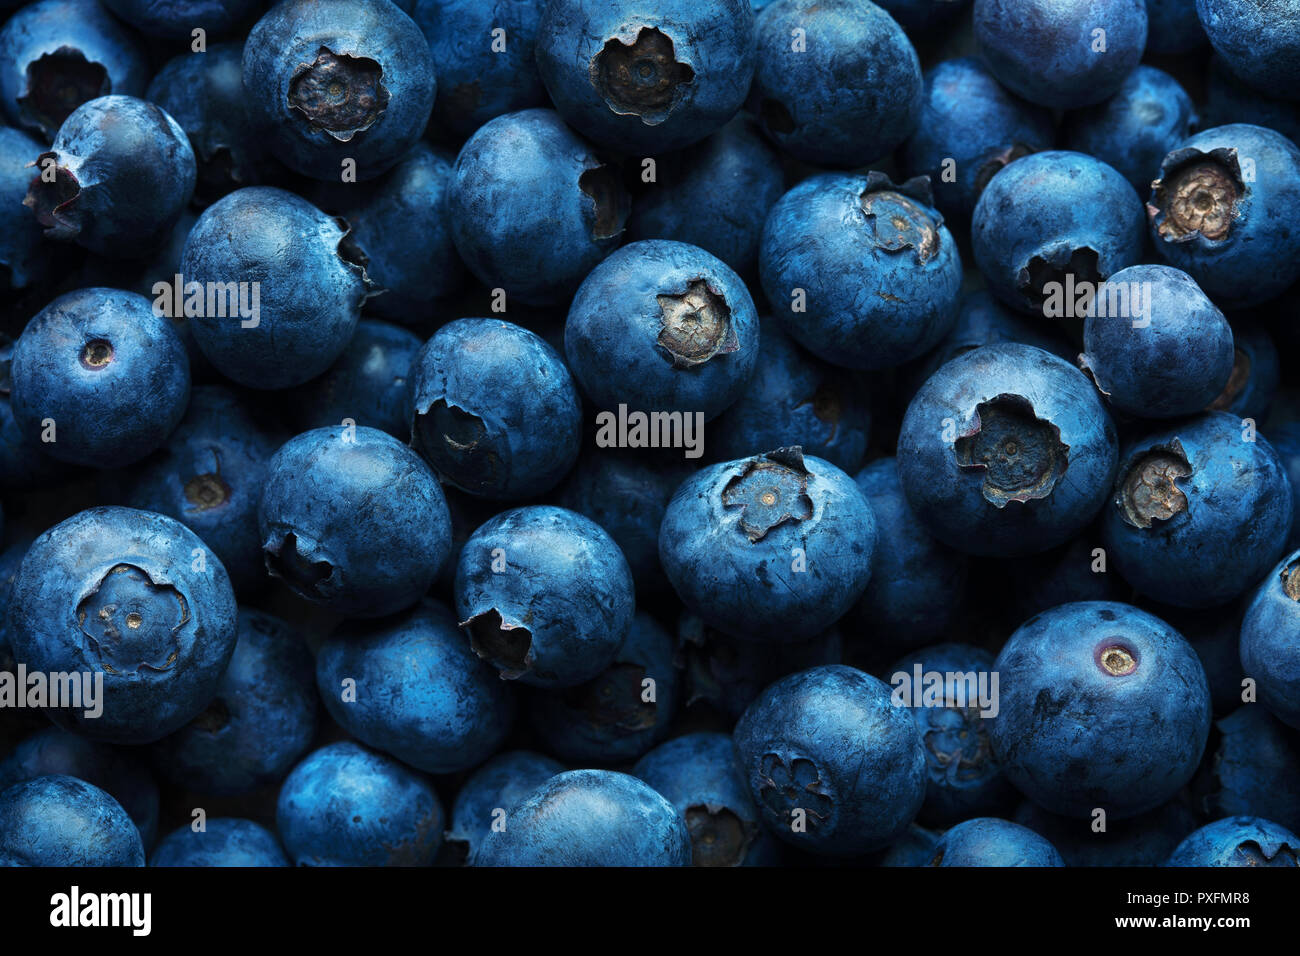 Blueberries background photographed from above full frame texture Stock Photo